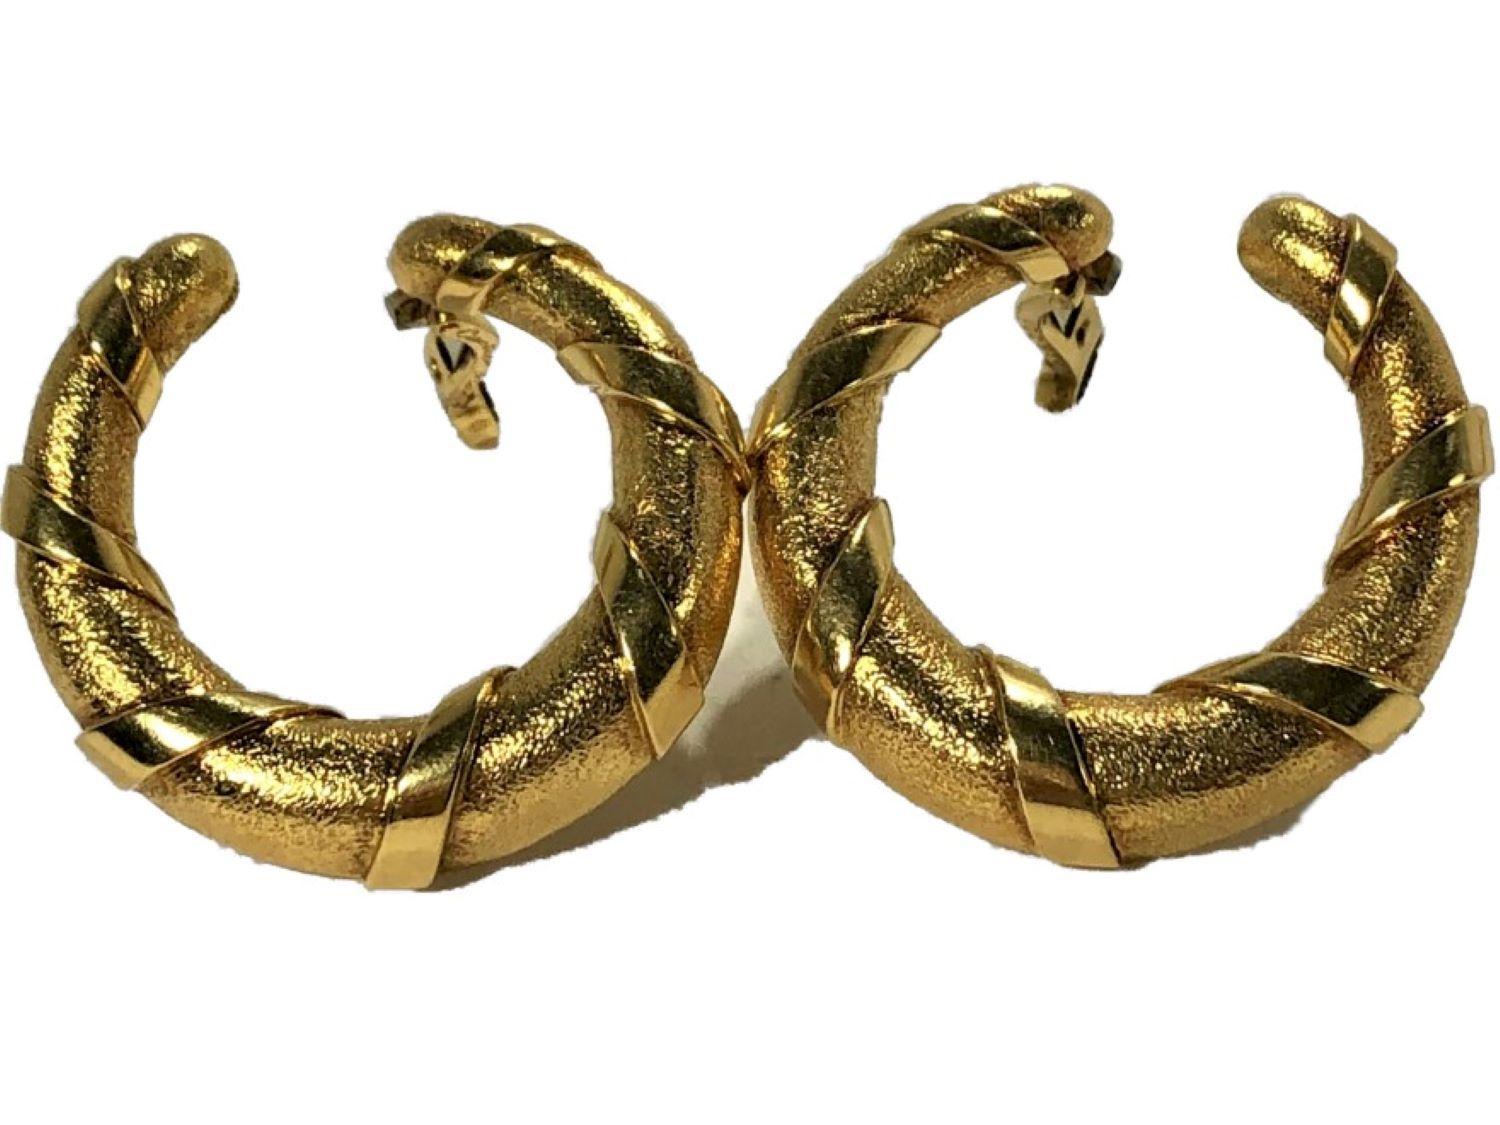 These lovely French Cartier  hoop earrings are crafted from 18k yellow gold and have a 1 3/16 inch outer diameter. The finely stippled finish is wrapped with  a high polish belting that gives an organic feel to the pair. They are signed CARTIER